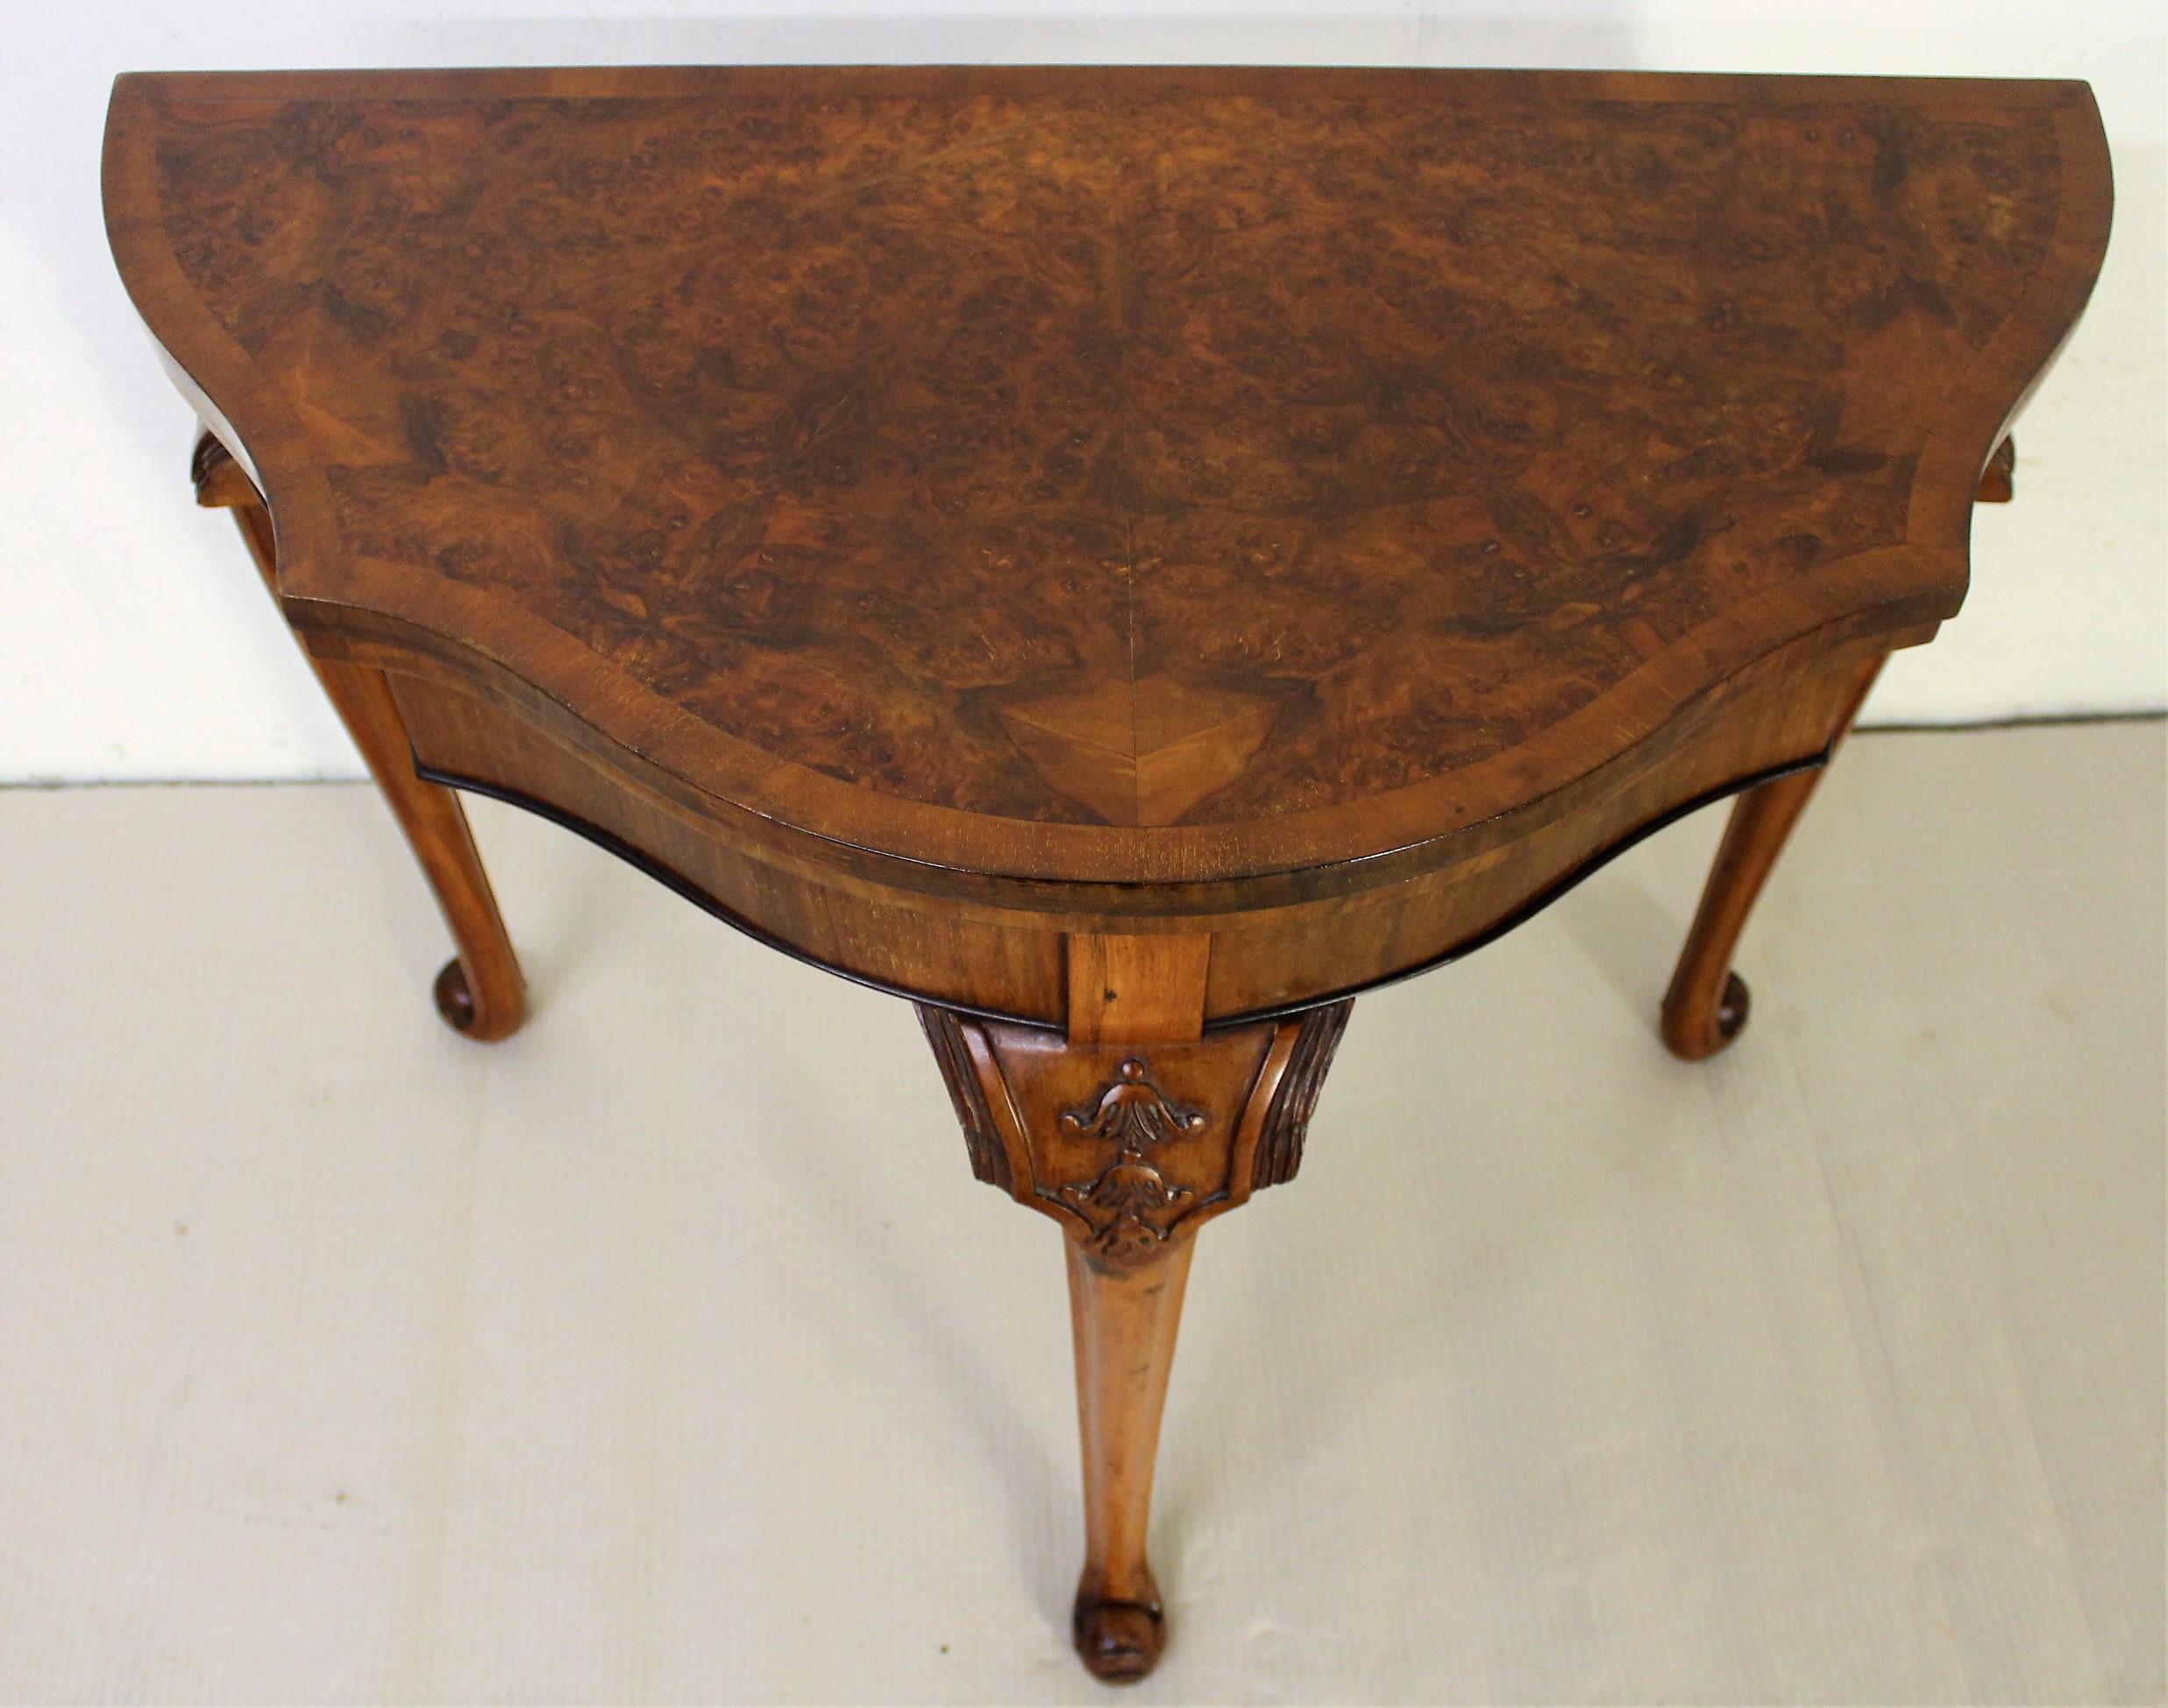 A charming burr walnut card/games table in the Queen Anne style. Well made in solid walnut with attractive burr walnut veneers. Of serpentine form with a crossbanded top. The top opens to reveal a playing surface fitted with a green baize. Whilst in